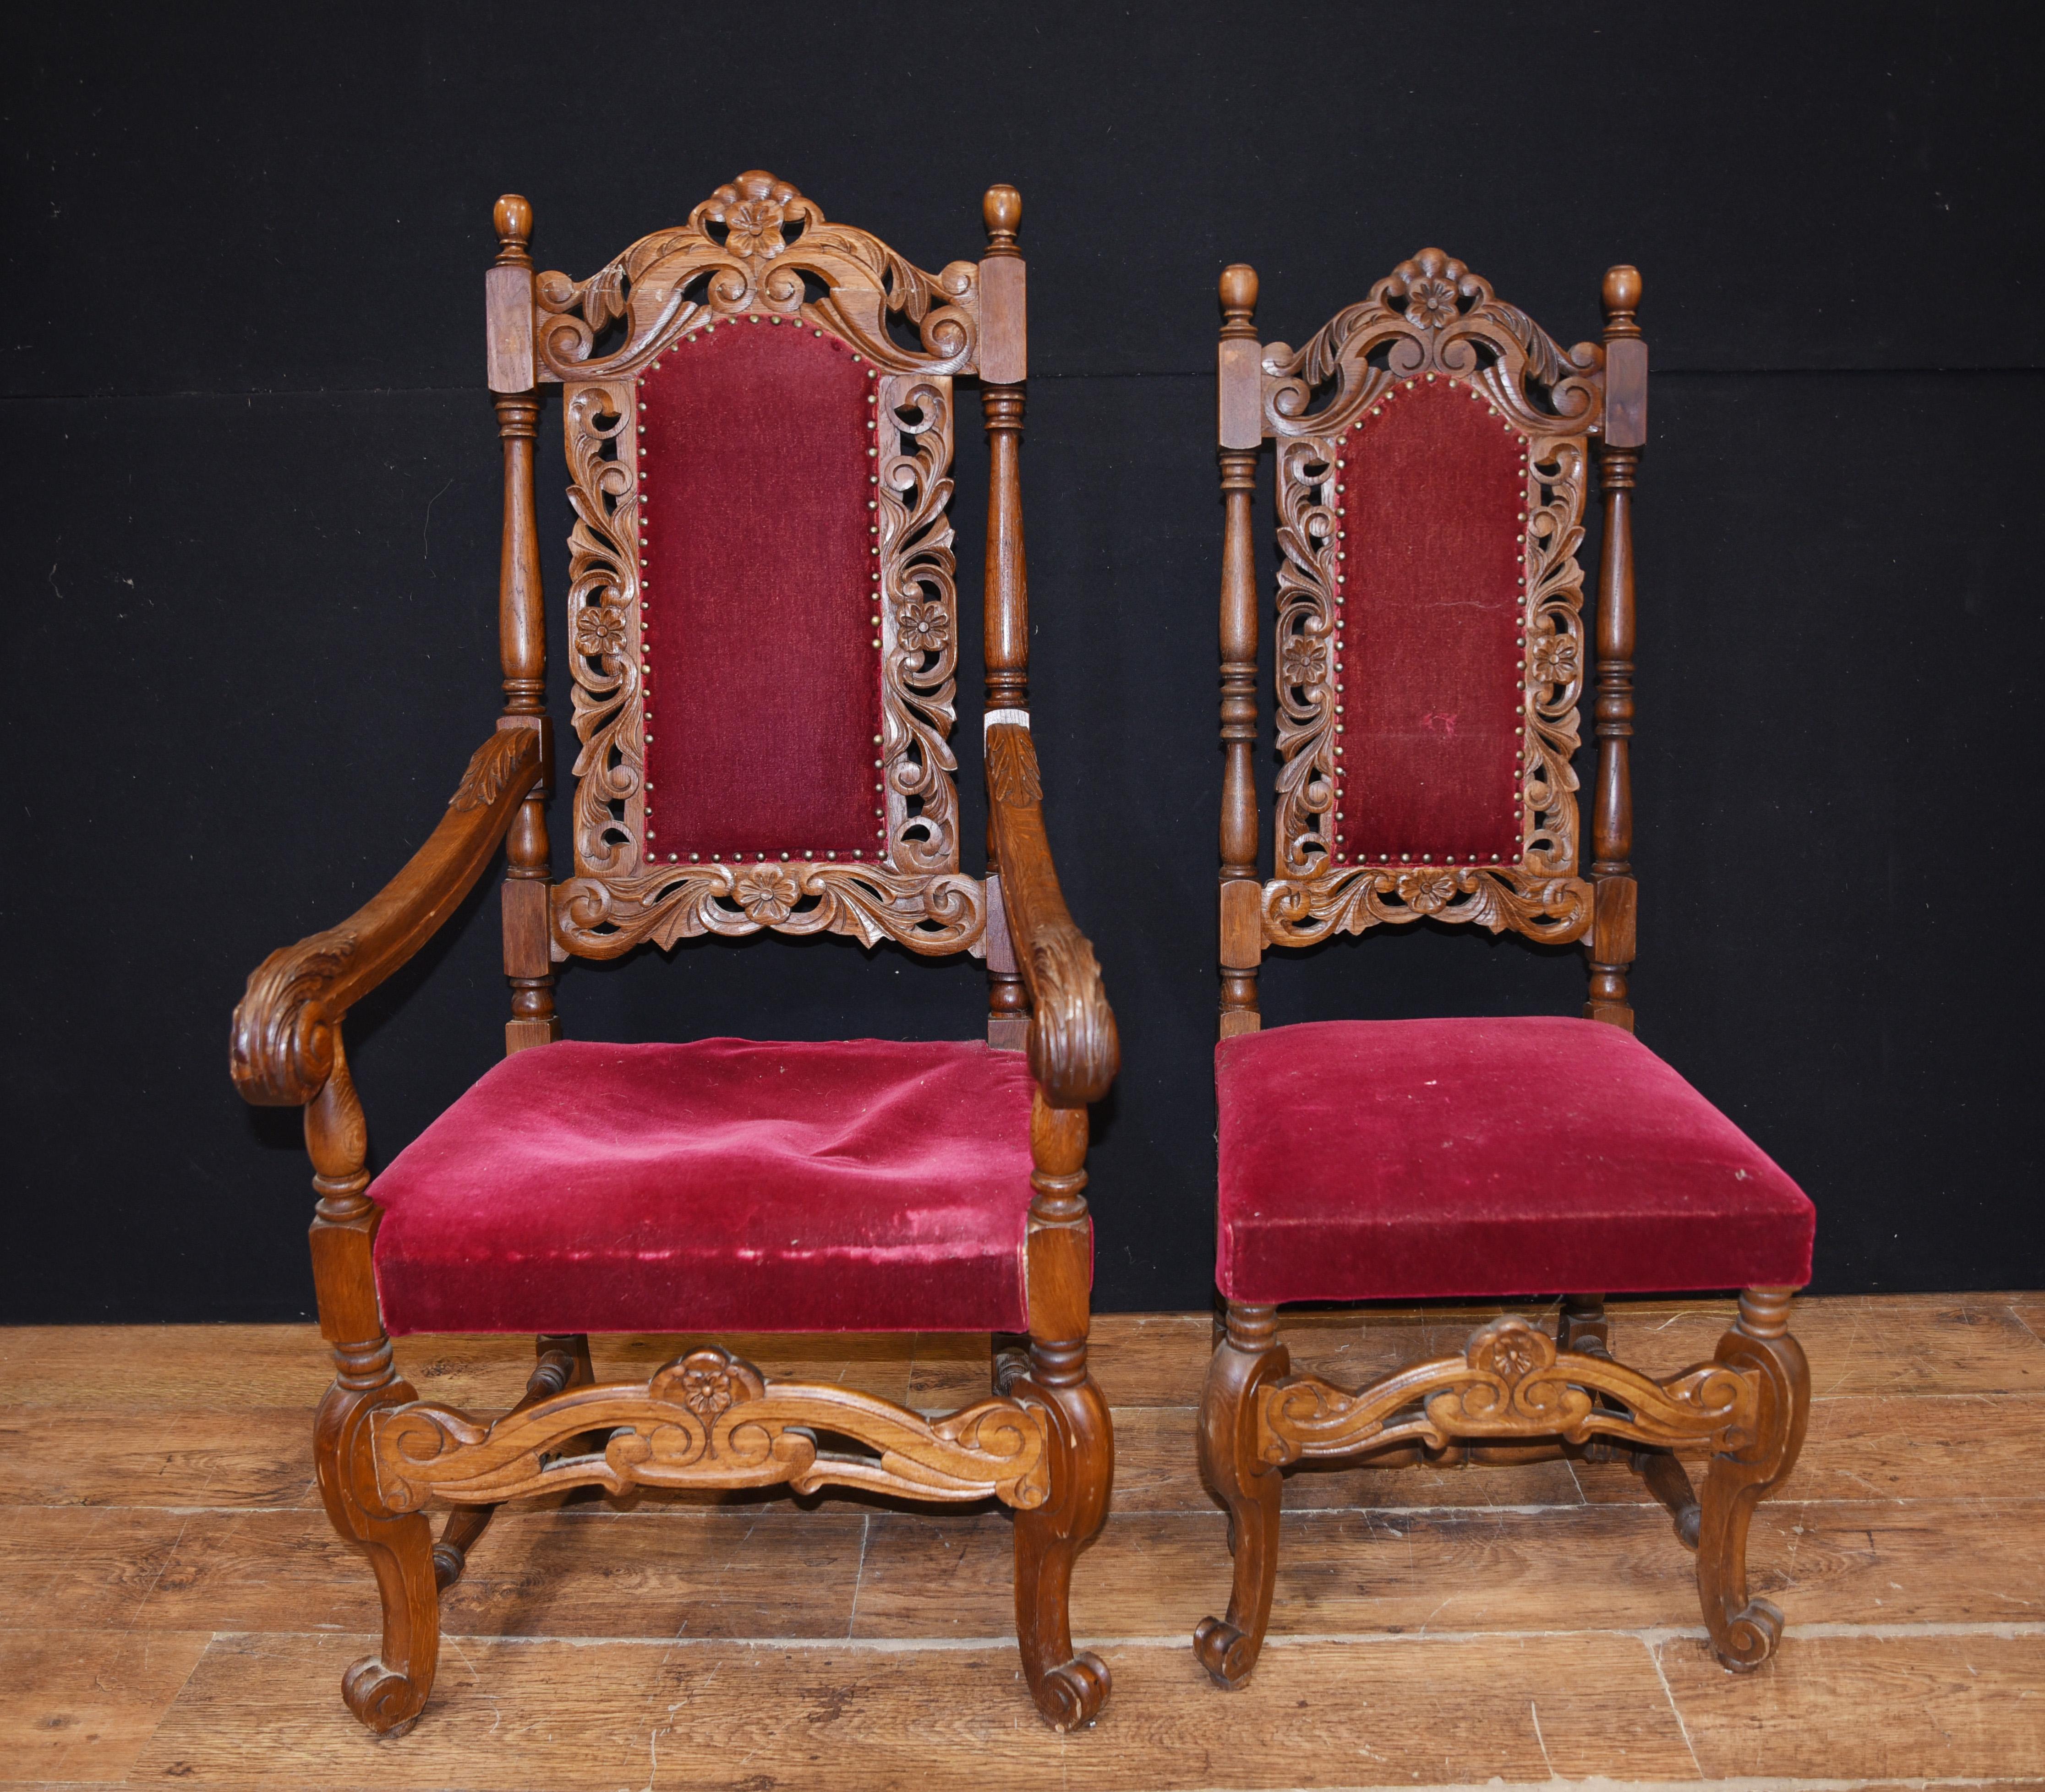 - Gorgeous set of six antique English oak kitchen dining chairs.
- Set consists of two arm chairs and four sides.
- Of course if you are looking for a complete table and chair set we have lots of refectory tables.
- Viewings available by